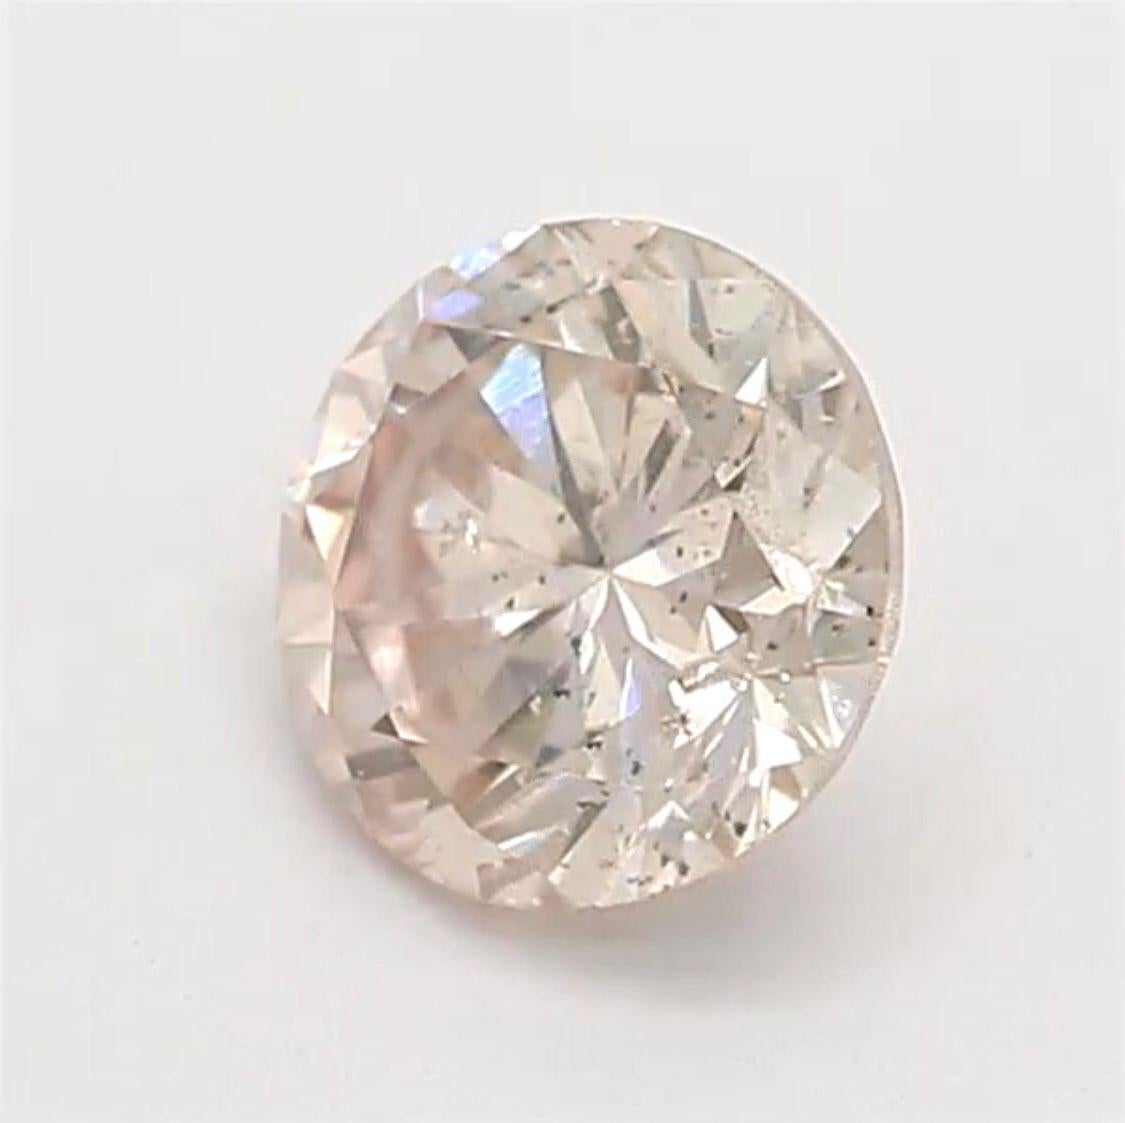 0.28 Carat Light Orangy Pink Round Shaped Diamond SI2 Clarity CGL Certified For Sale 2